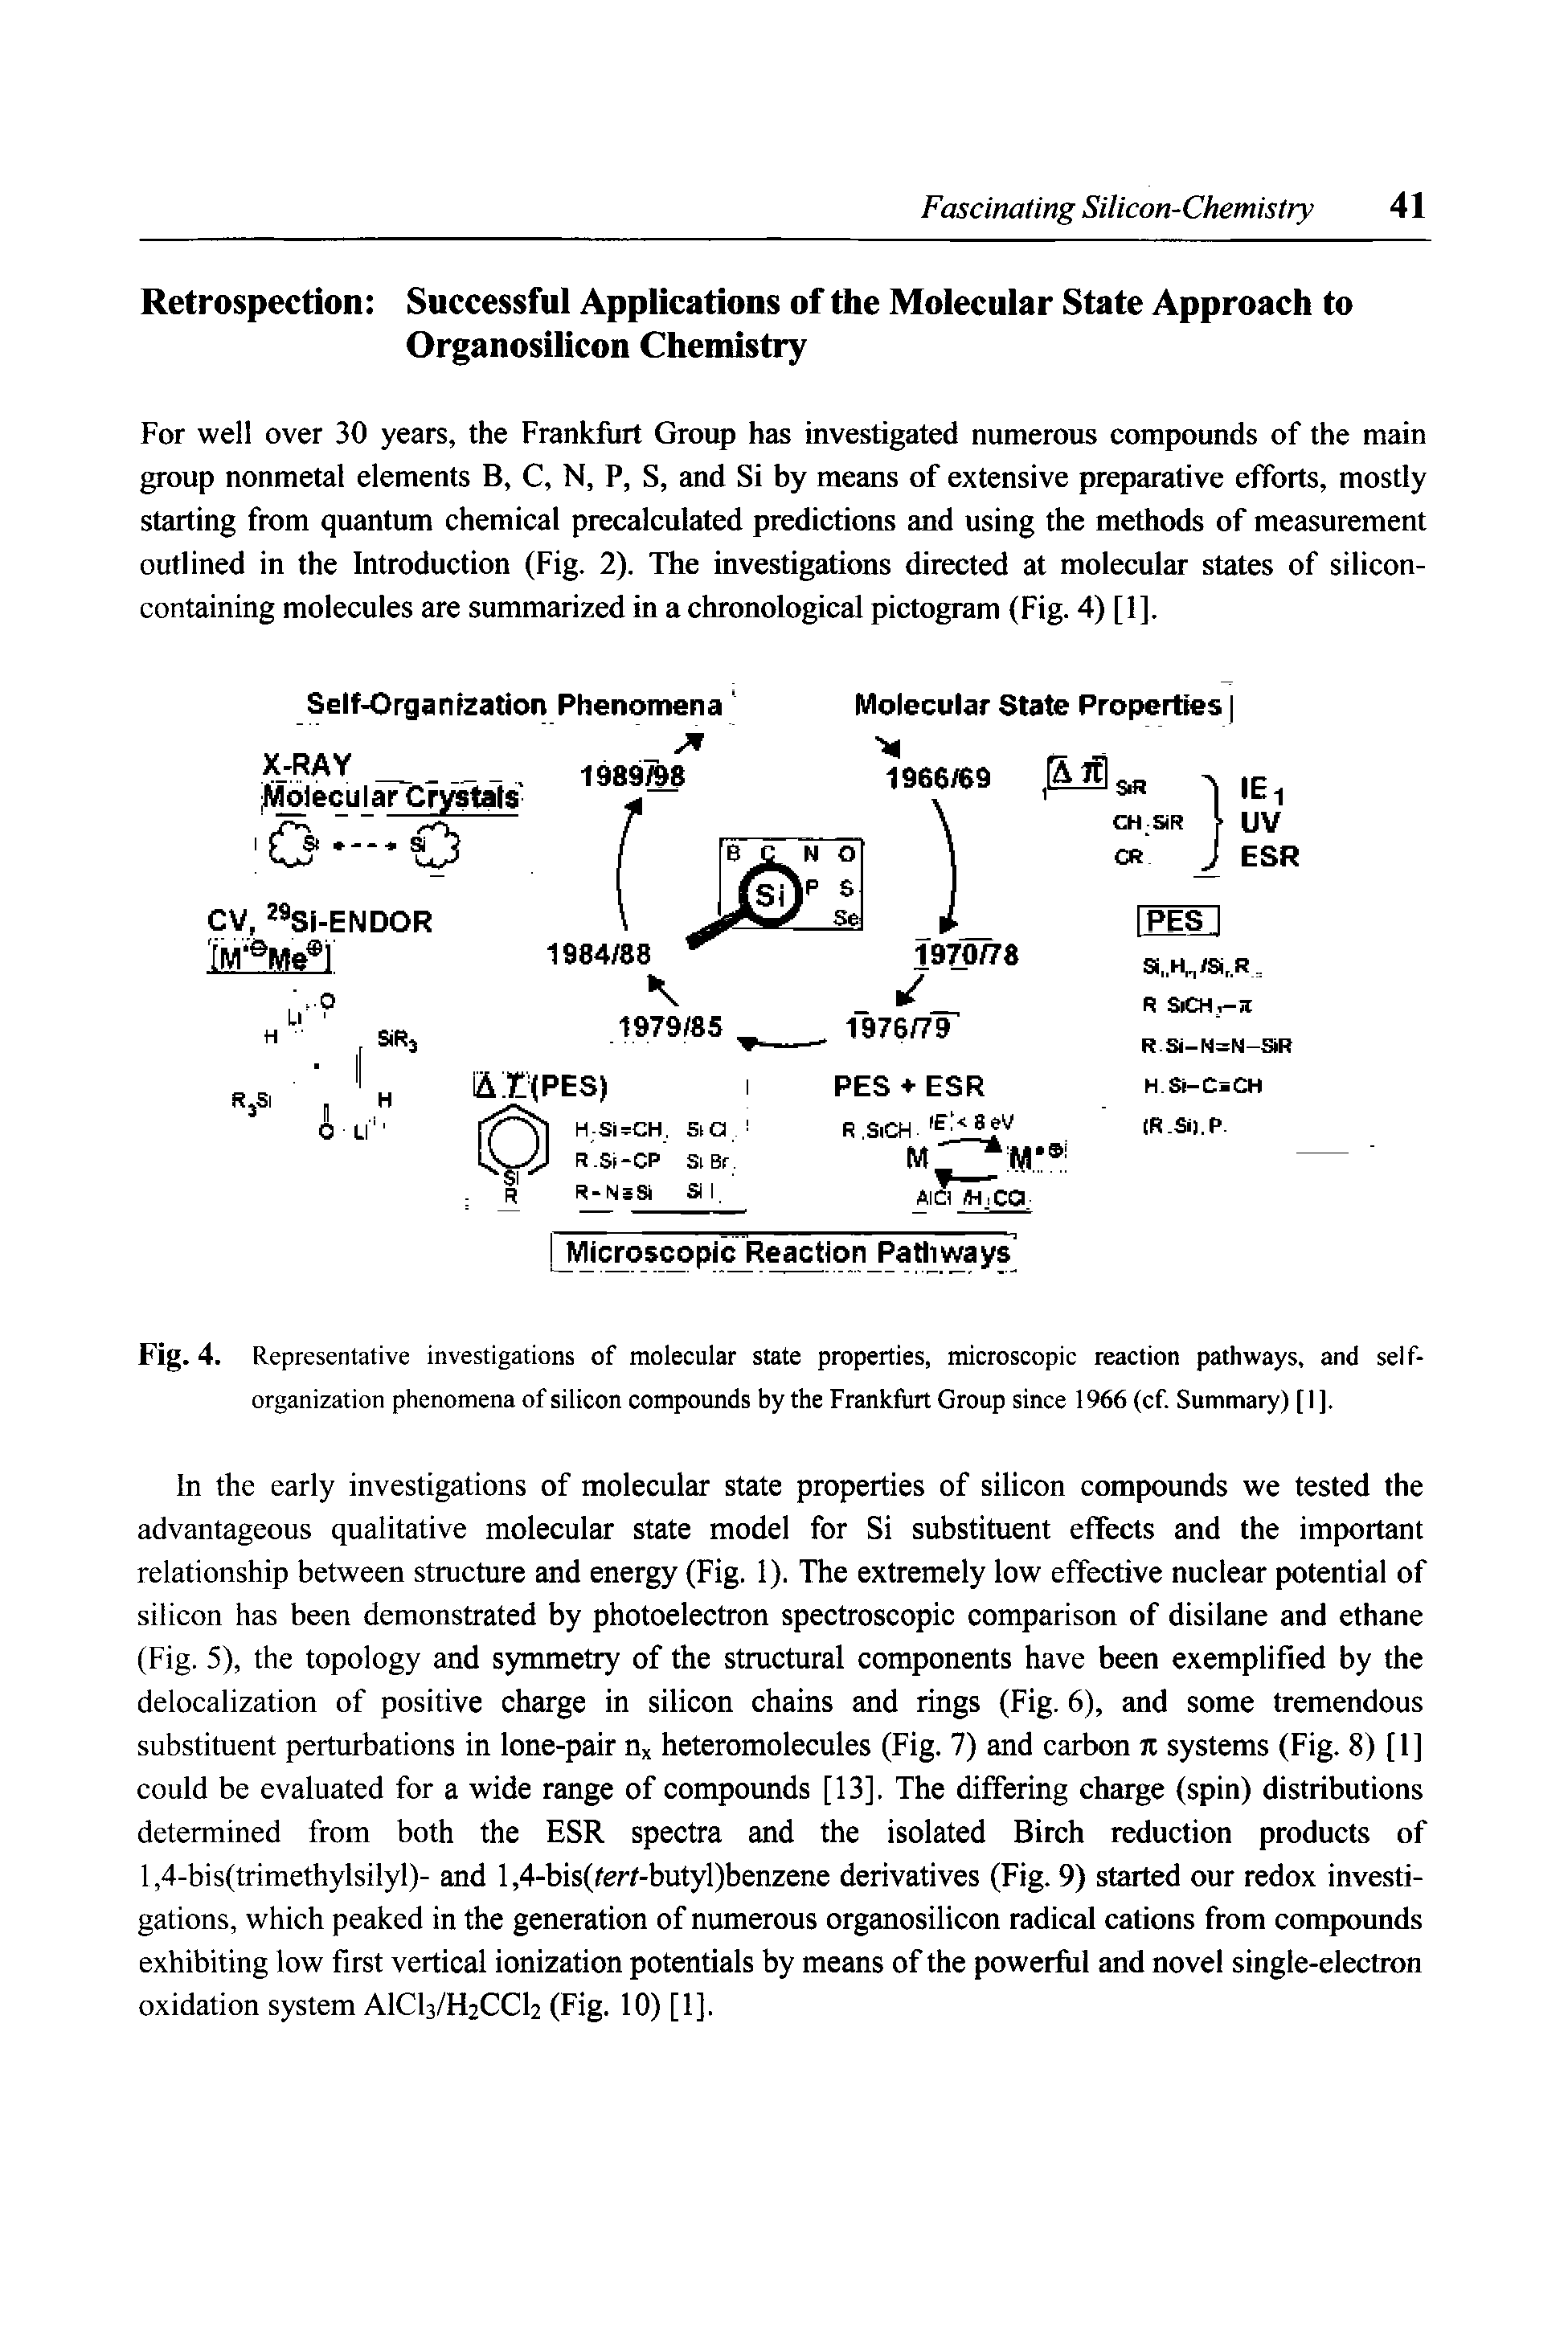 Fig. 4. Representative investigations of molecular state properties, microscopic reaction pathways, and selforganization phenomena of silicon compounds by the Frankfurt Group since 1966 (cf. Summary) [ I ].